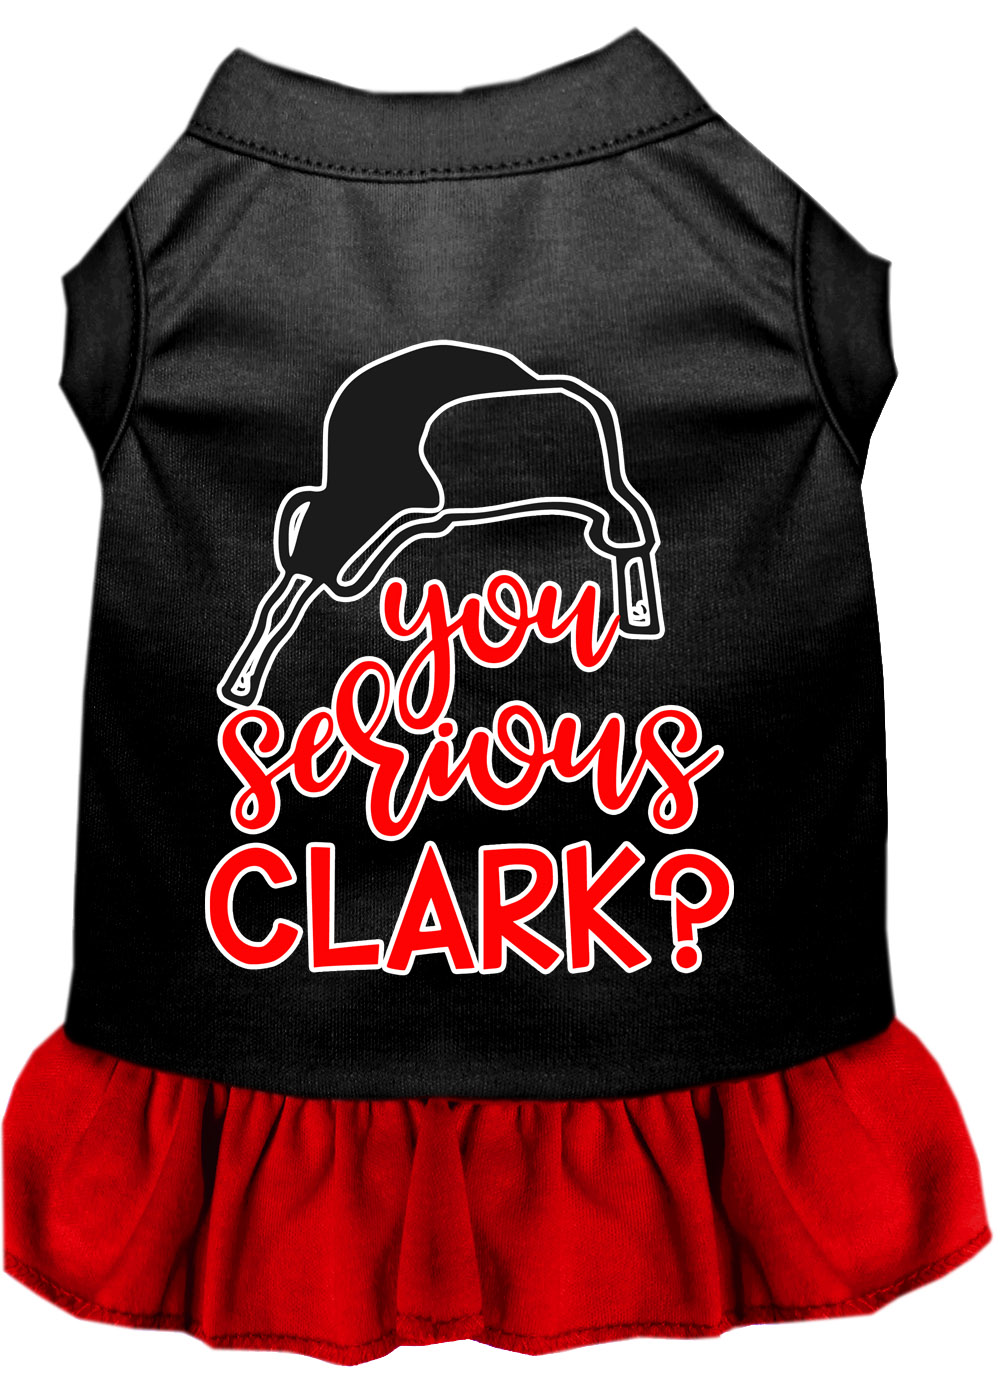 You Serious Clark? Screen Print Dog Dress Black with Red Lg